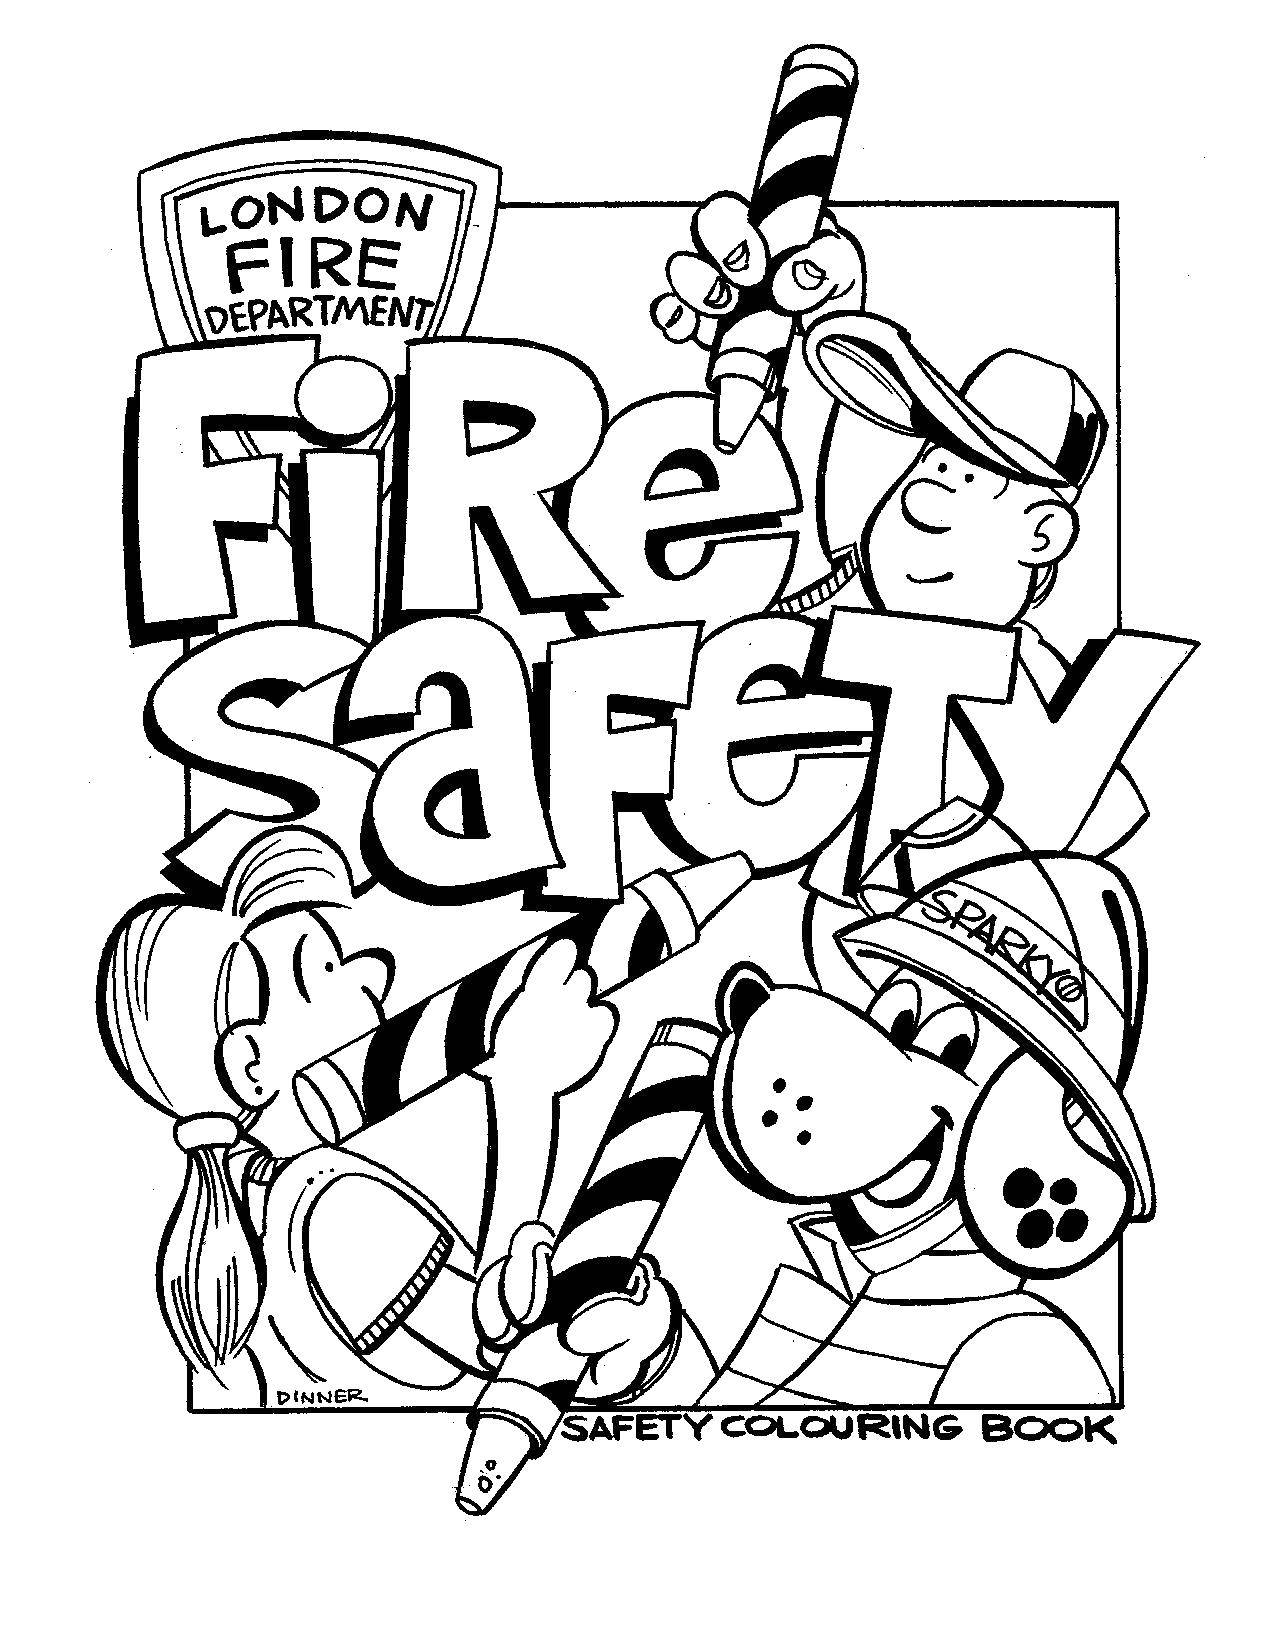 Coloring Fire safety. Category Fire. Tags:  fire, fire, fire truck, safety.